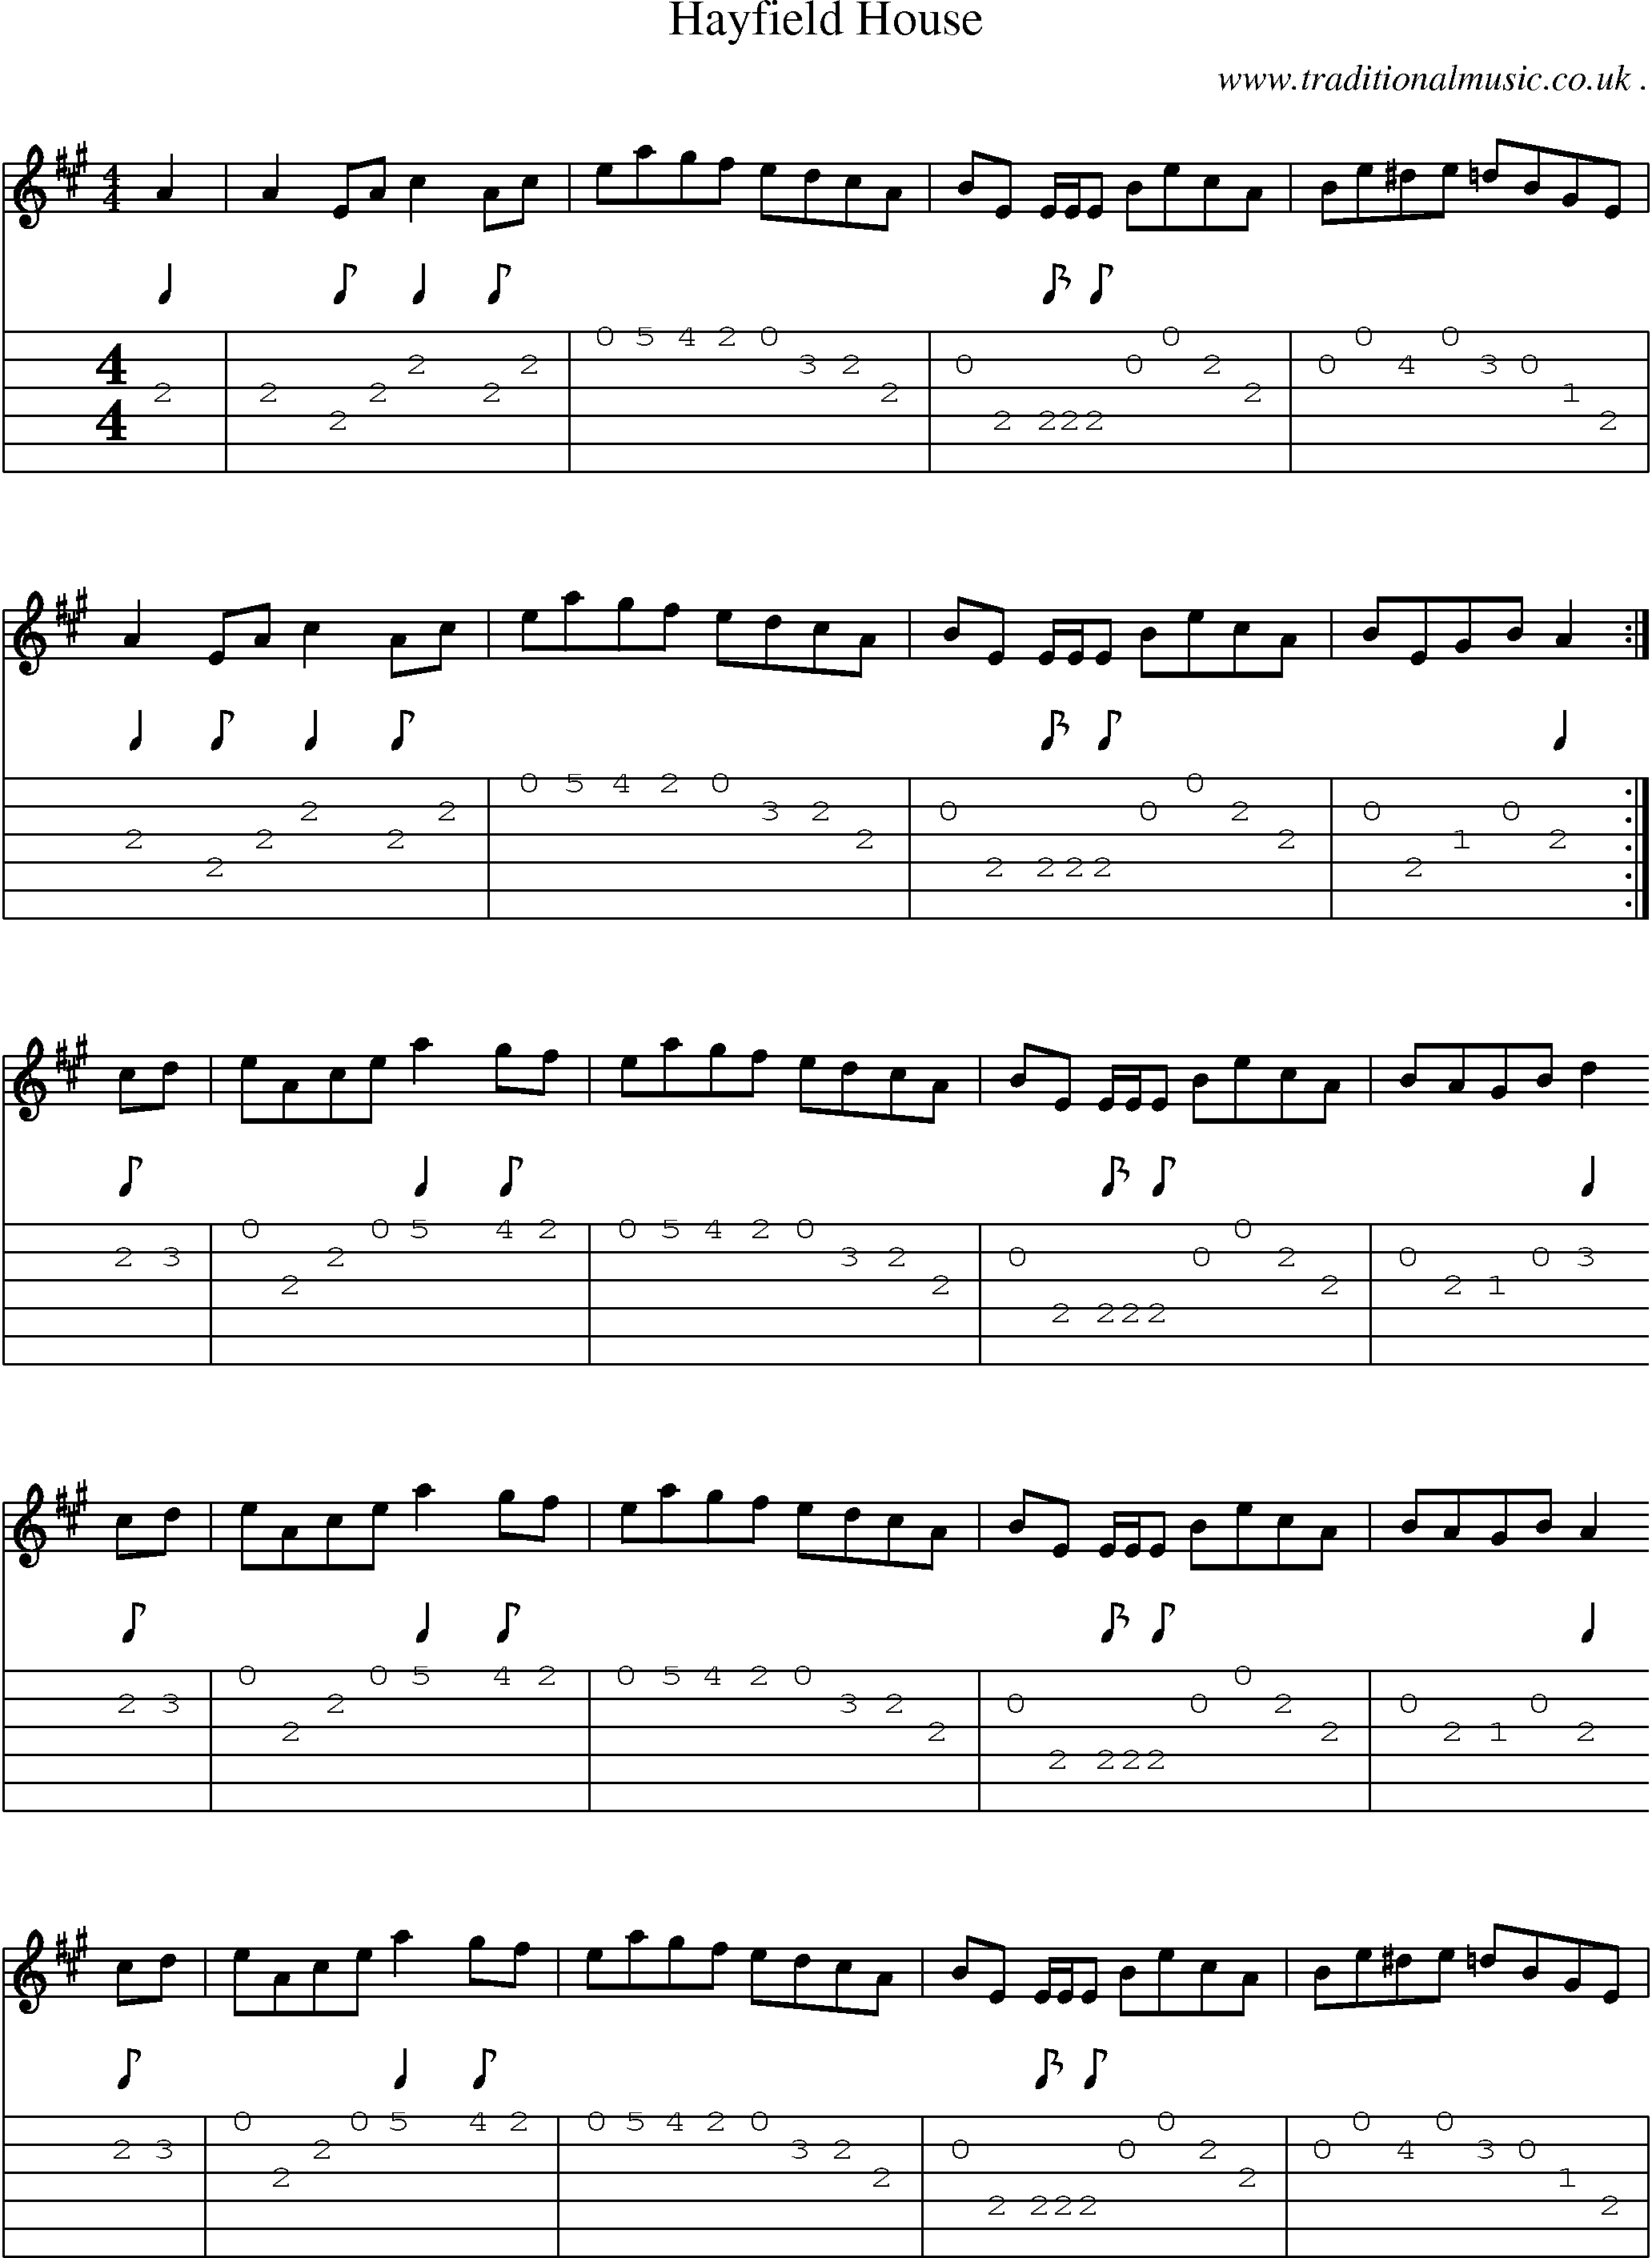 Sheet-music  score, Chords and Guitar Tabs for Hayfield House